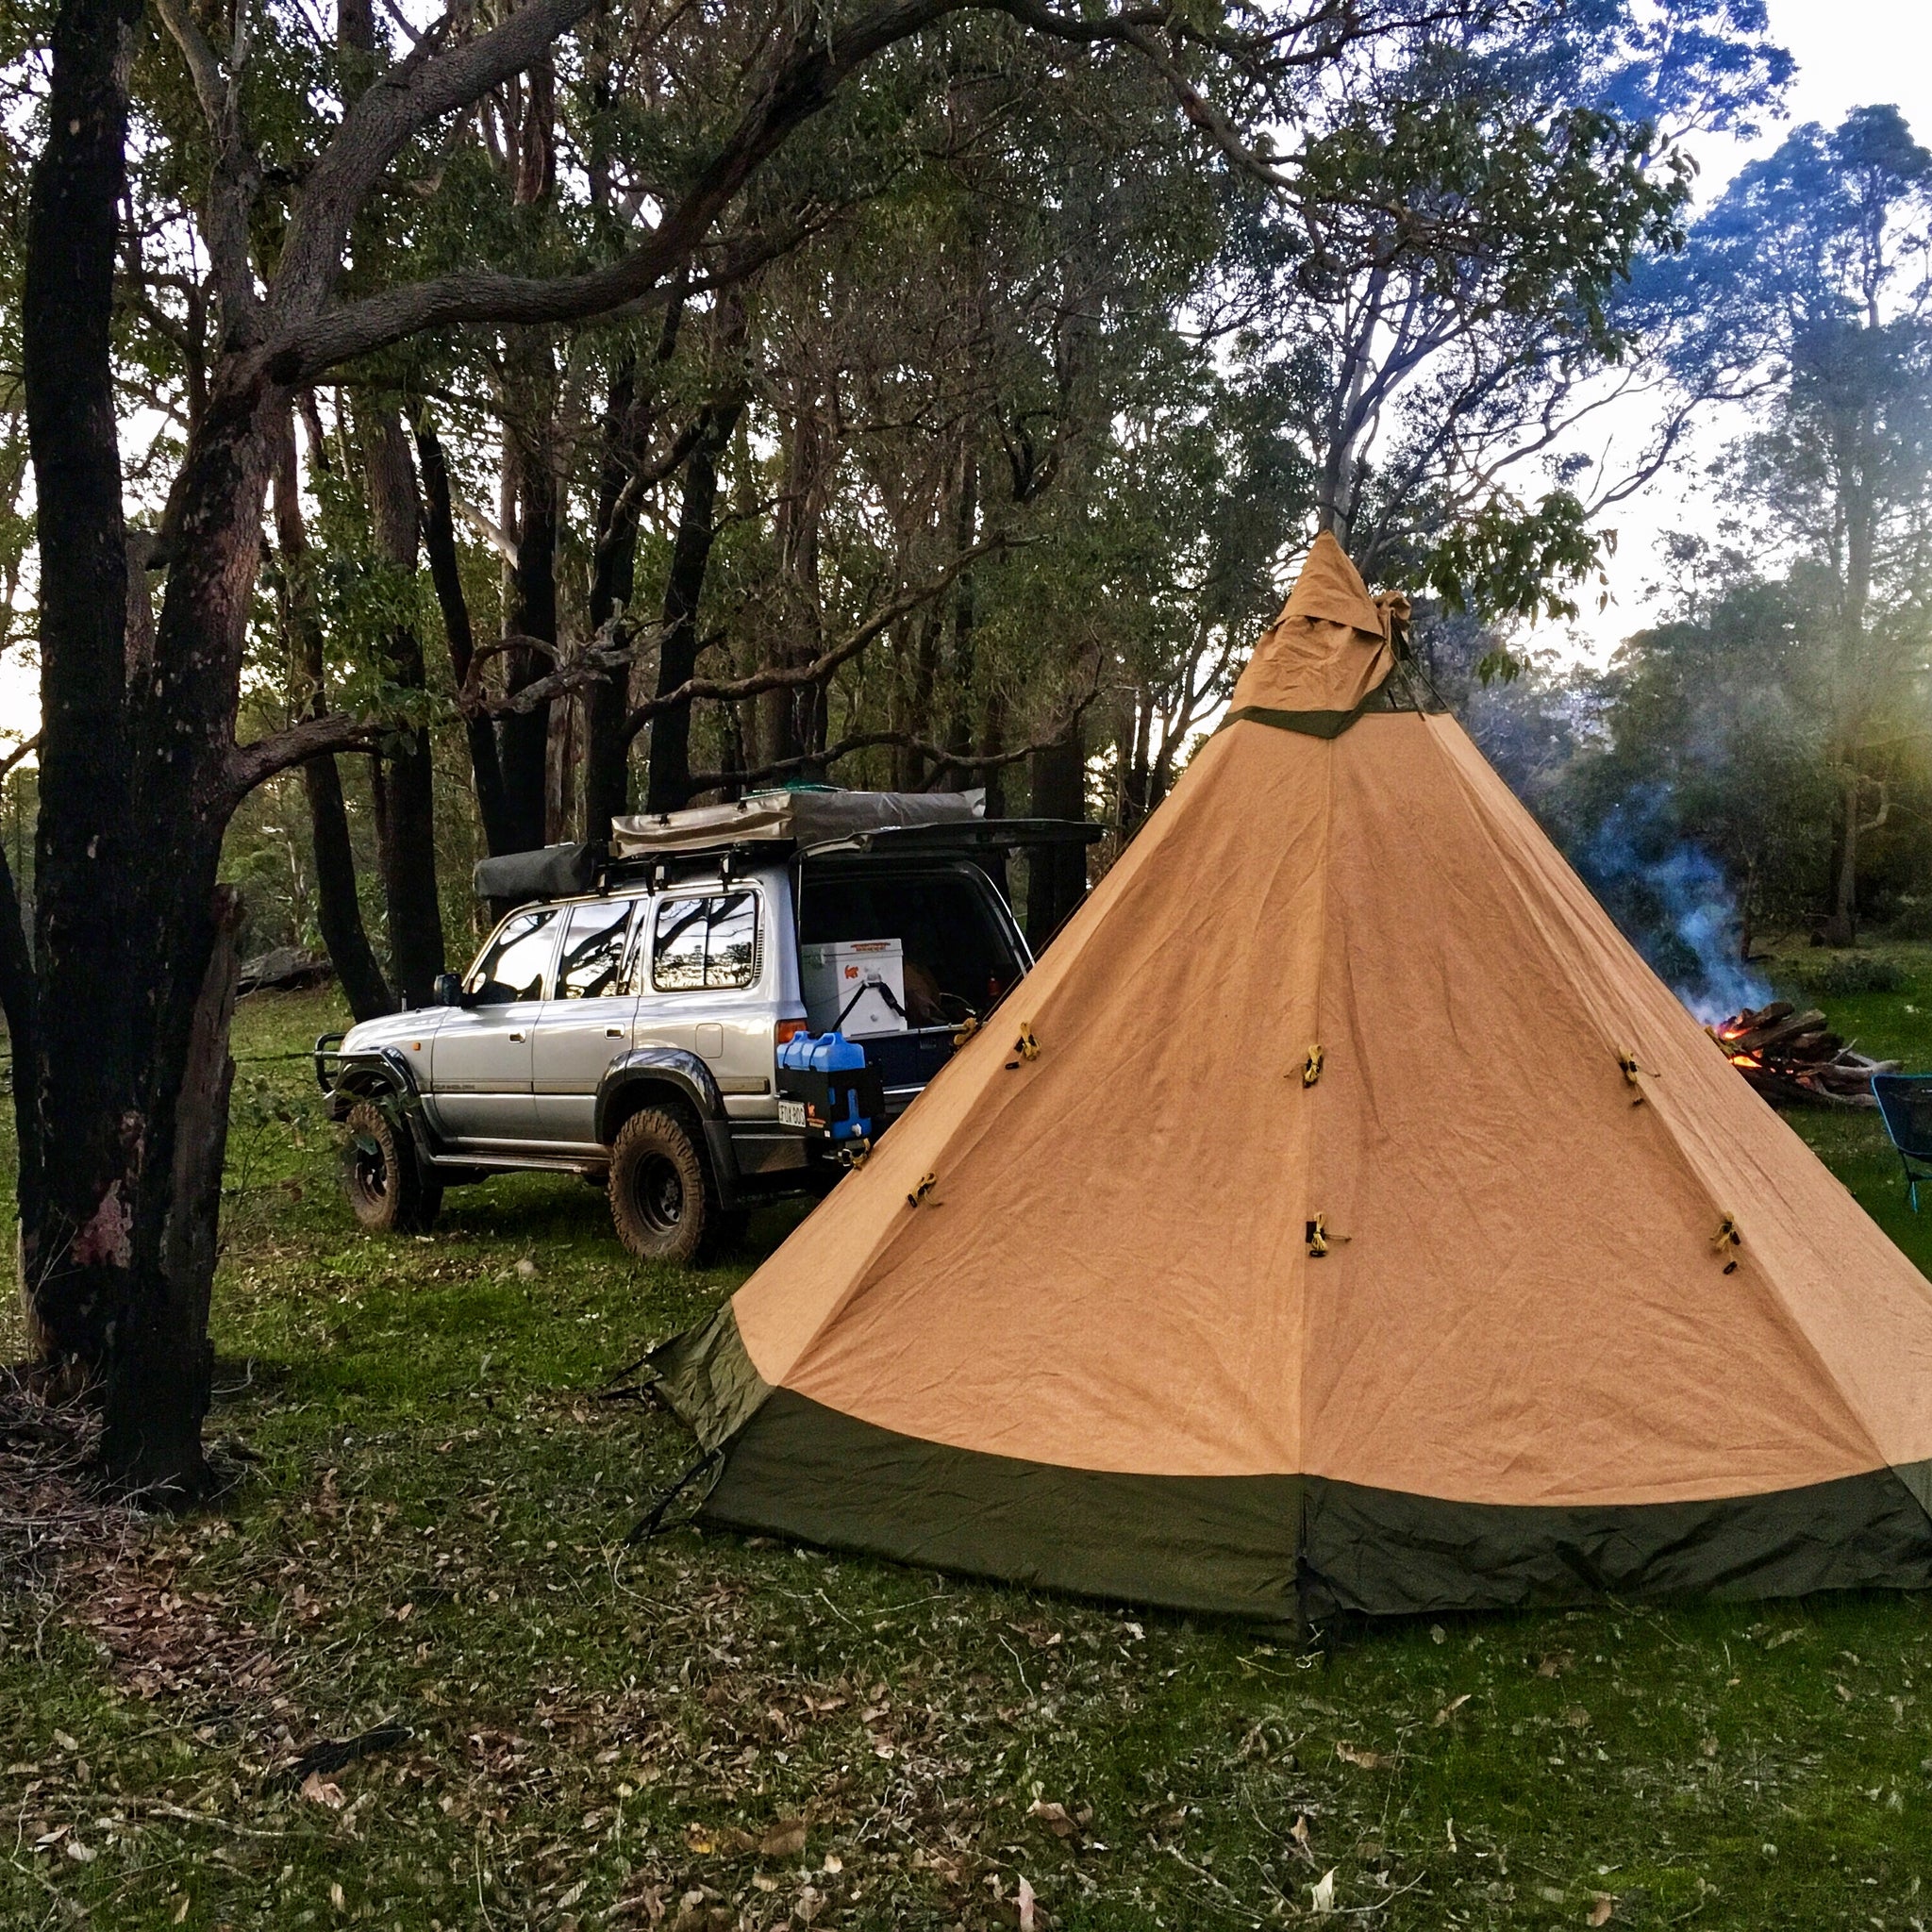 With fast setup time and quality materials the Tentipi Safir 7CP is in a league of it's own. There is no better tent on the market. Compact and light it's perfect for car camping or 4WD touring especially in Australia. We've used our Tentipi for a long 6 month trip in Australia and have been extremely pleased at it's performance in windy weather. The Tentipi Safir 7CP also breathes very well in hot conditions. We have been all through Queensland in the dry season and it's worked fine. This is the best tent we have ever used.